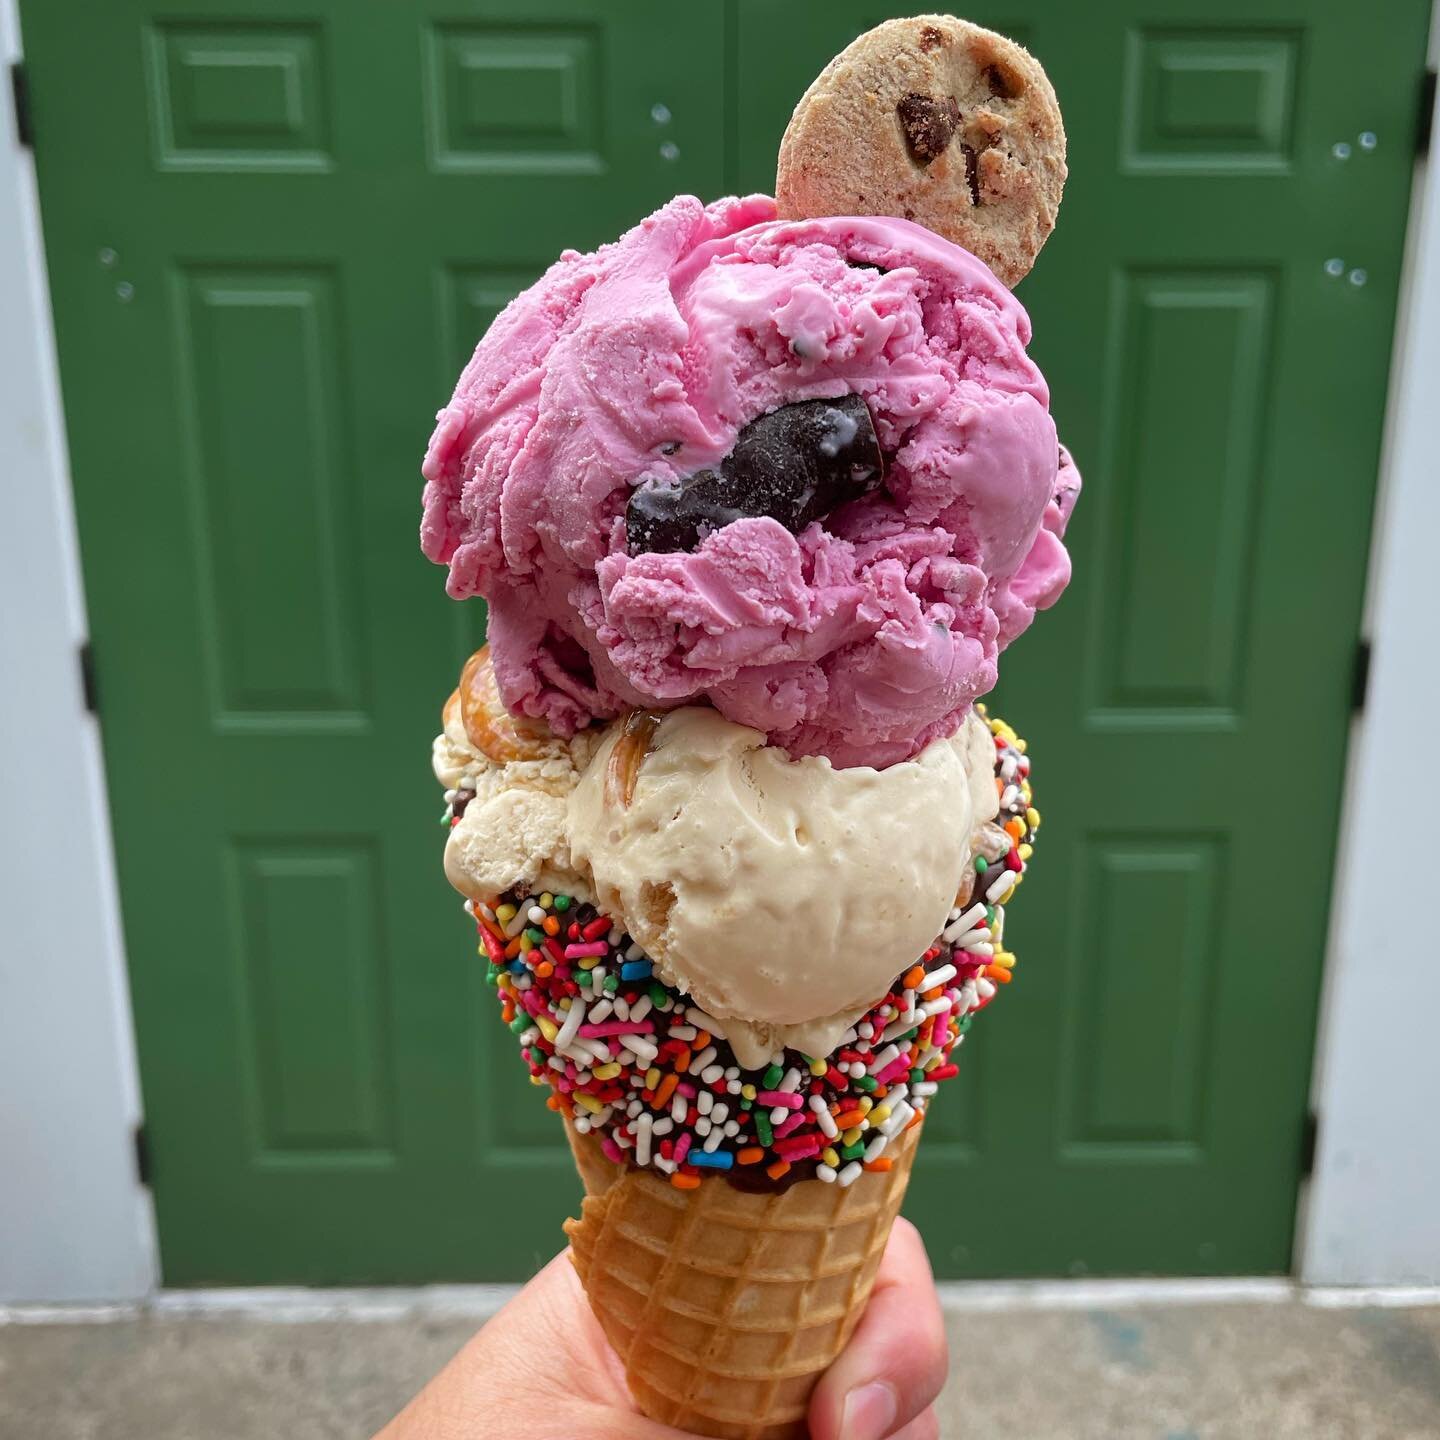 Don&rsquo;t worry, you don&rsquo;t have to settle for one flavor #doublescoop pictured: raspberry chocolate chunk and salty caramel on a chocolate dipped, rainbow sprinkle cone. #saturdaysweets